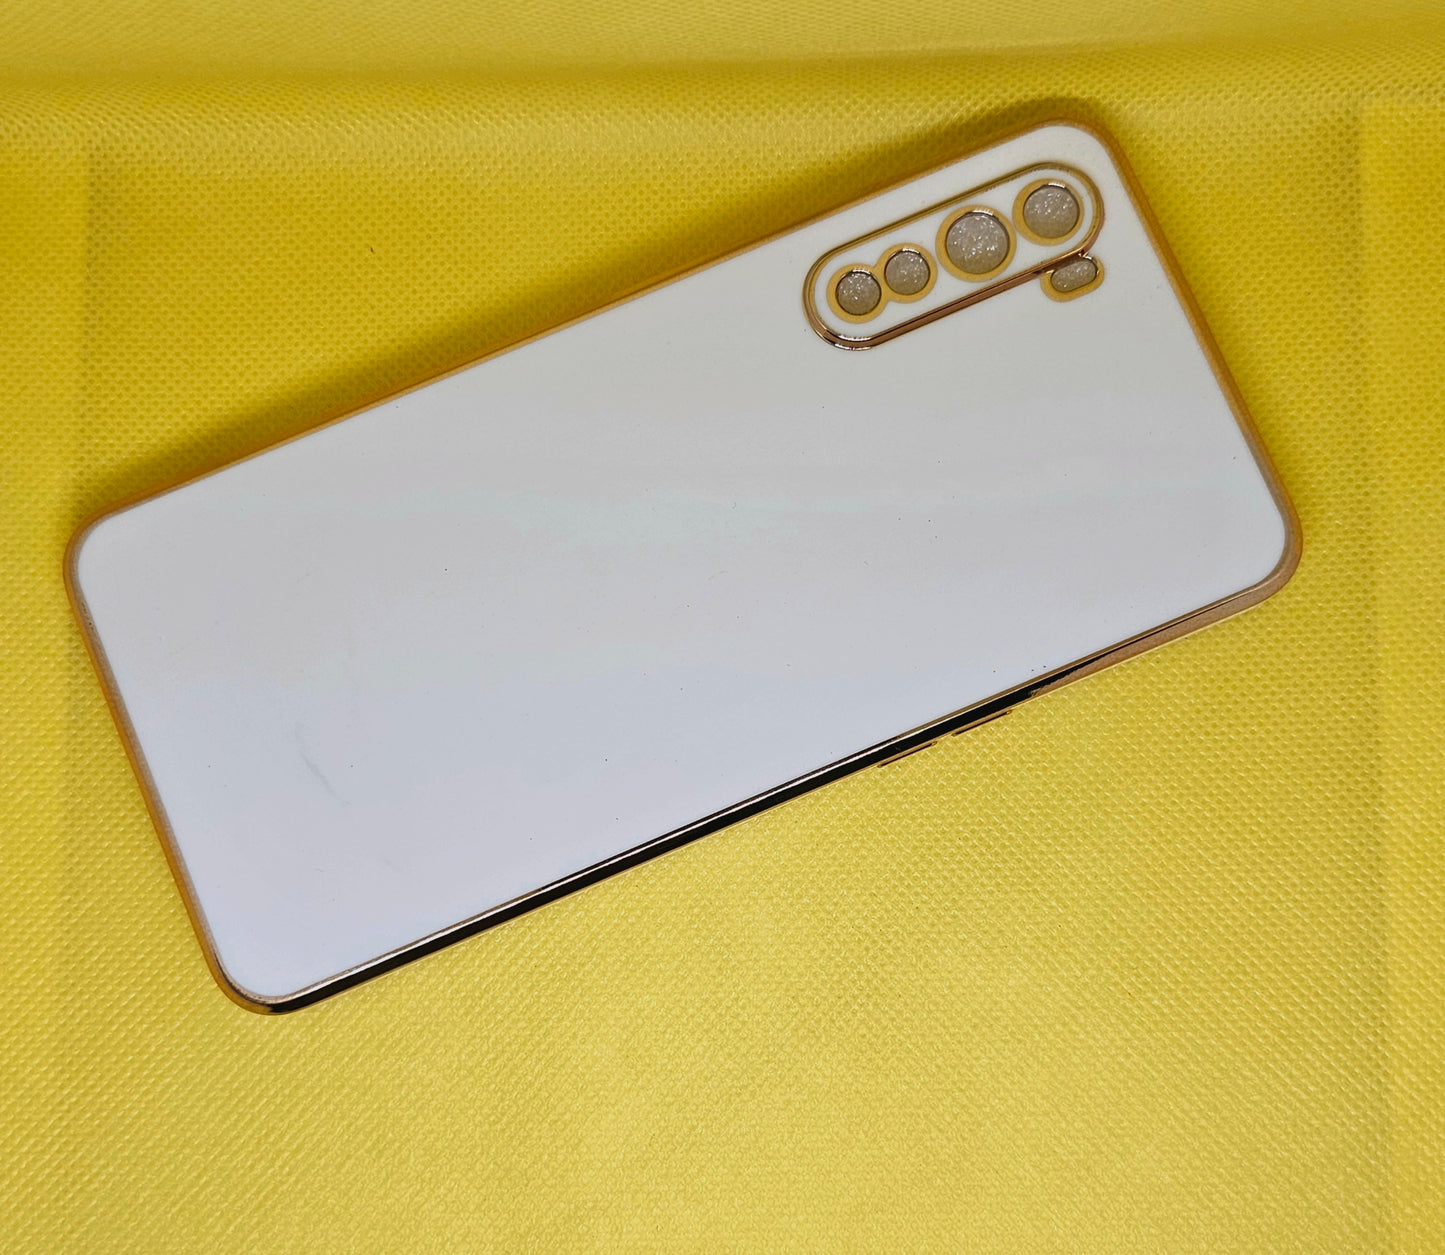 One Plus Nord 6D Chrome Back Cover